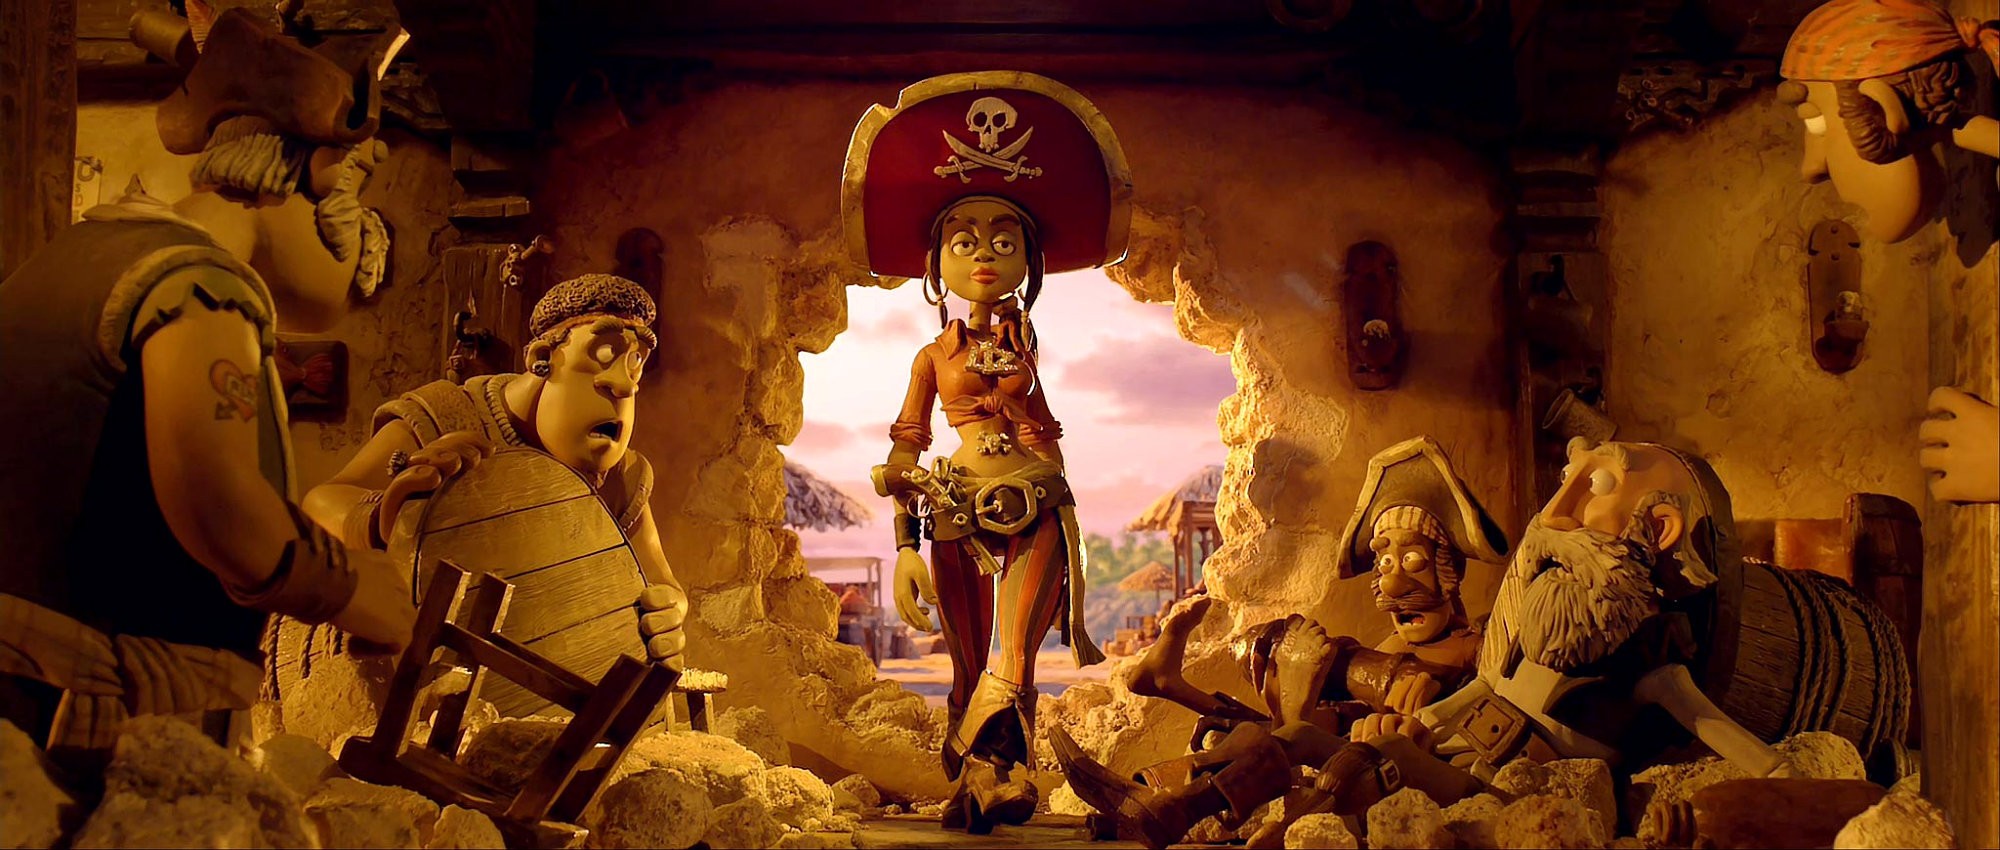 A scene from Columbia Pictures' The Pirates! Band of Misfits (2012)